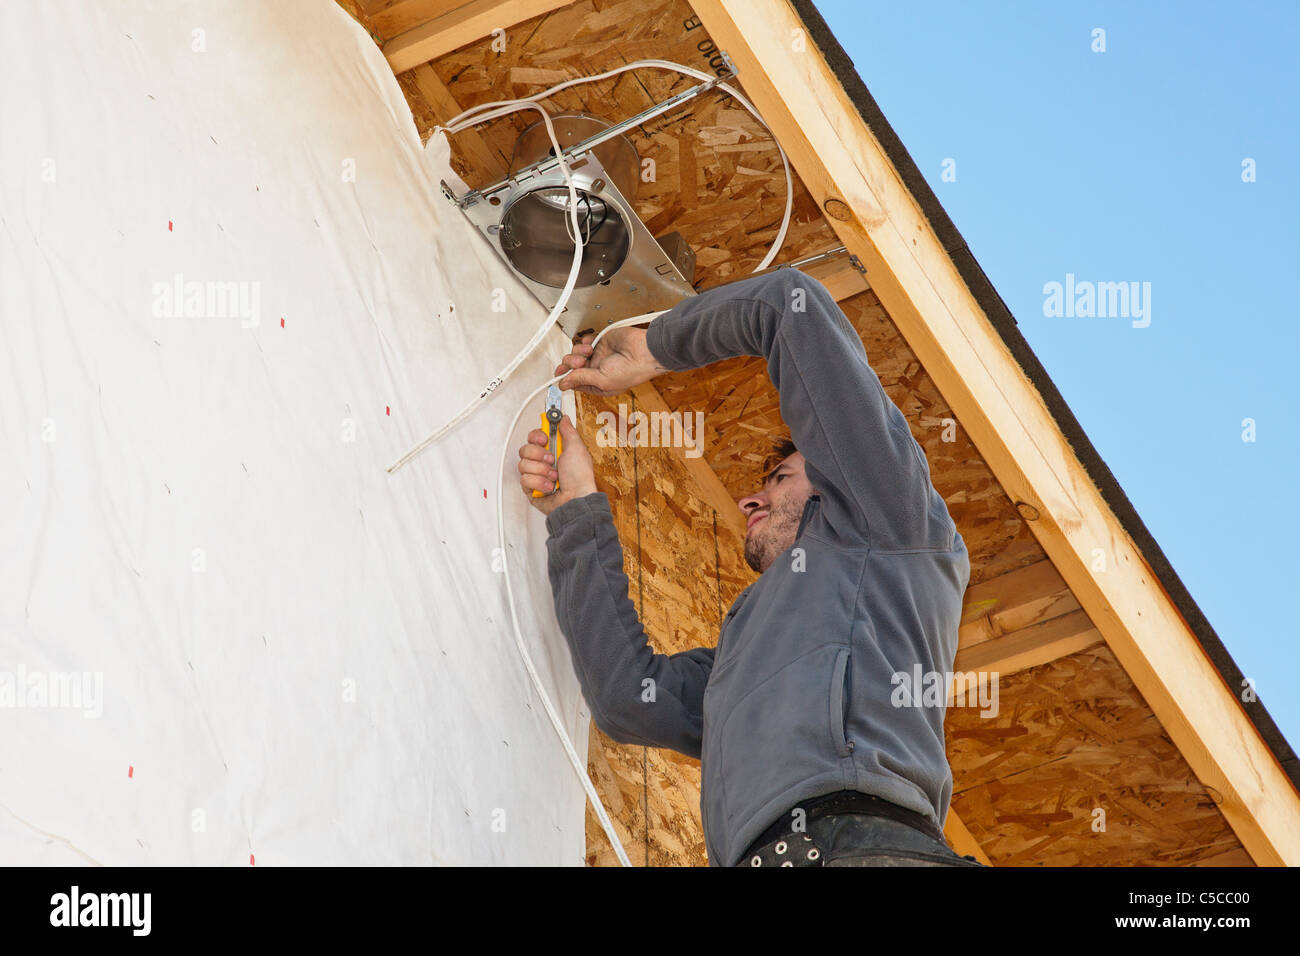 Electrician Installing Light Fixtures On House Stock Photo